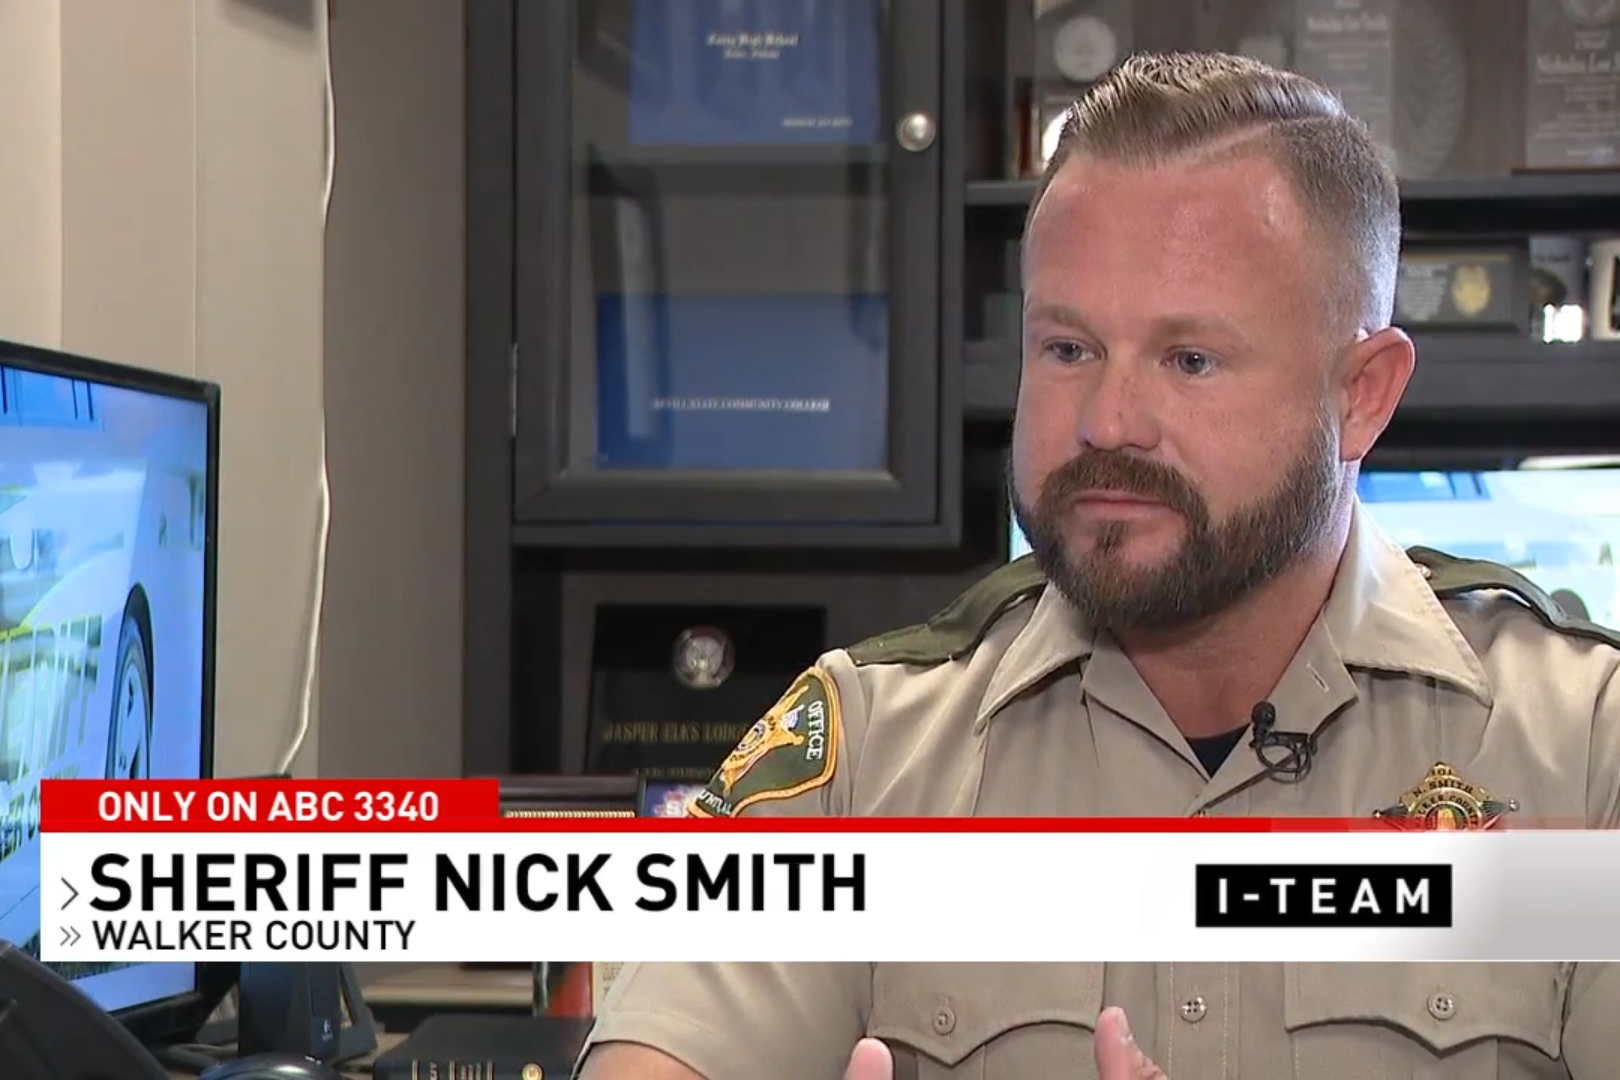 A photo of a man in a sheriff's uniform being interviewed on a TV news channel.